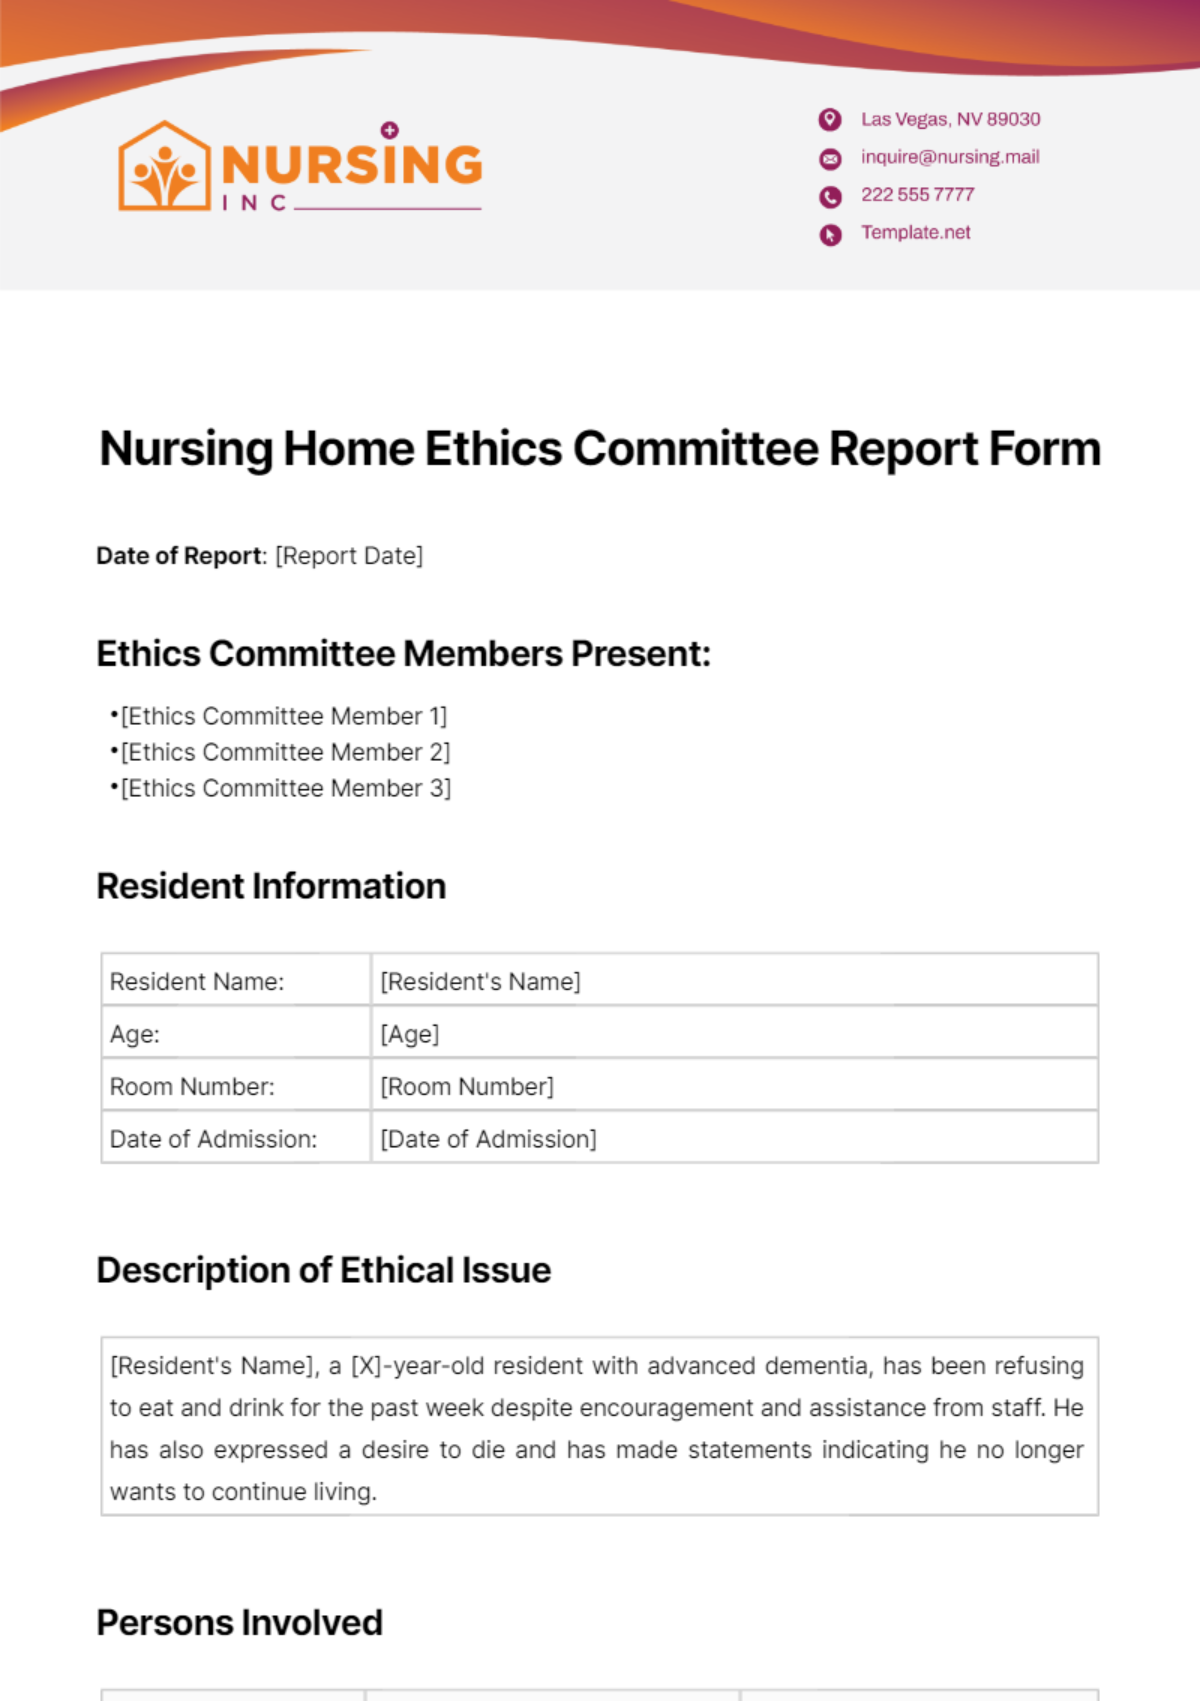 Nursing Home Ethics Committee Report Form Template